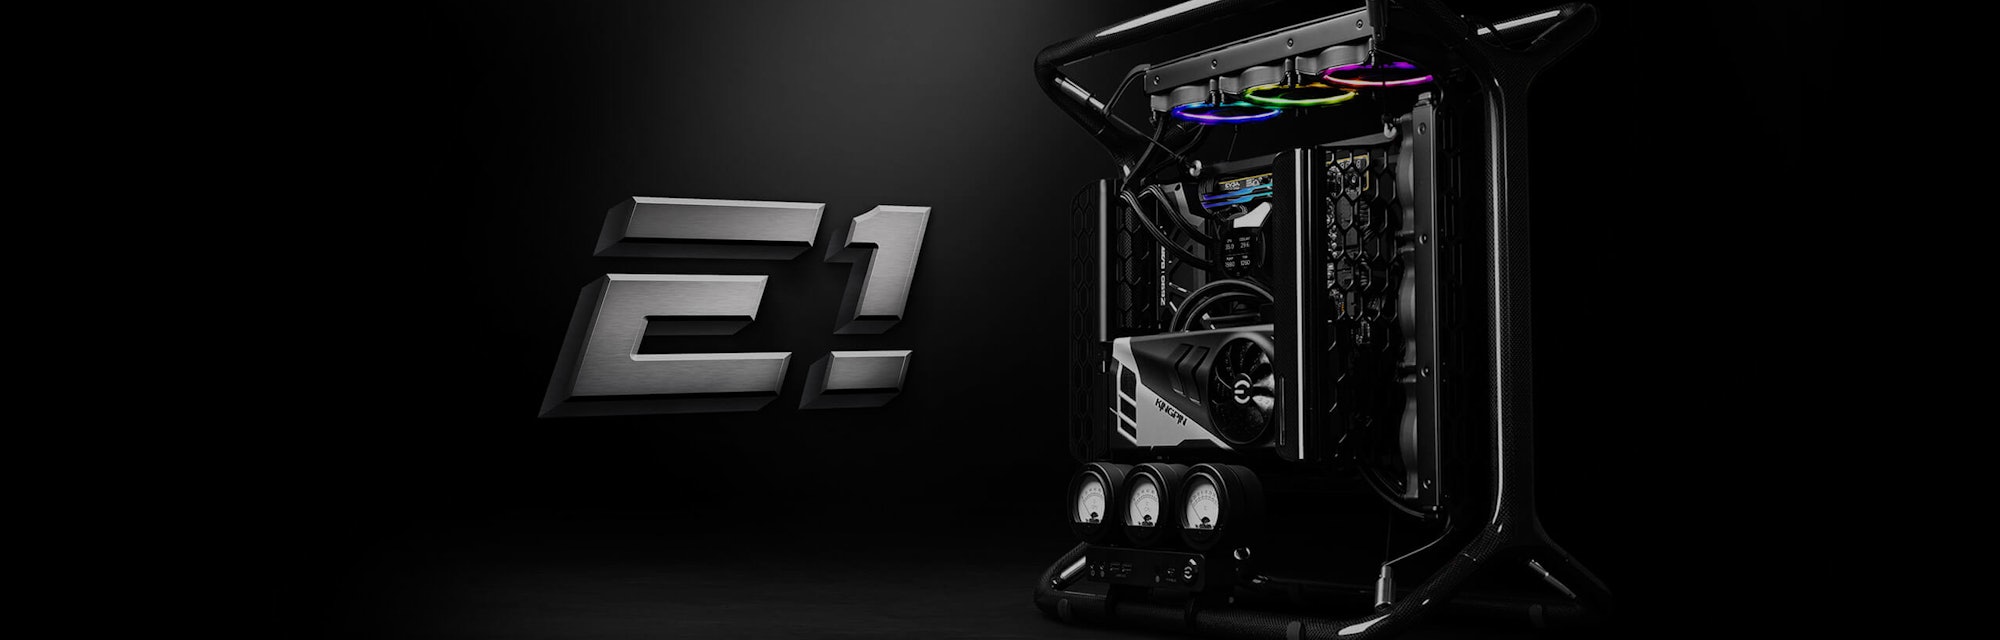 EVGA's E1 gaming rig with open chassis design.